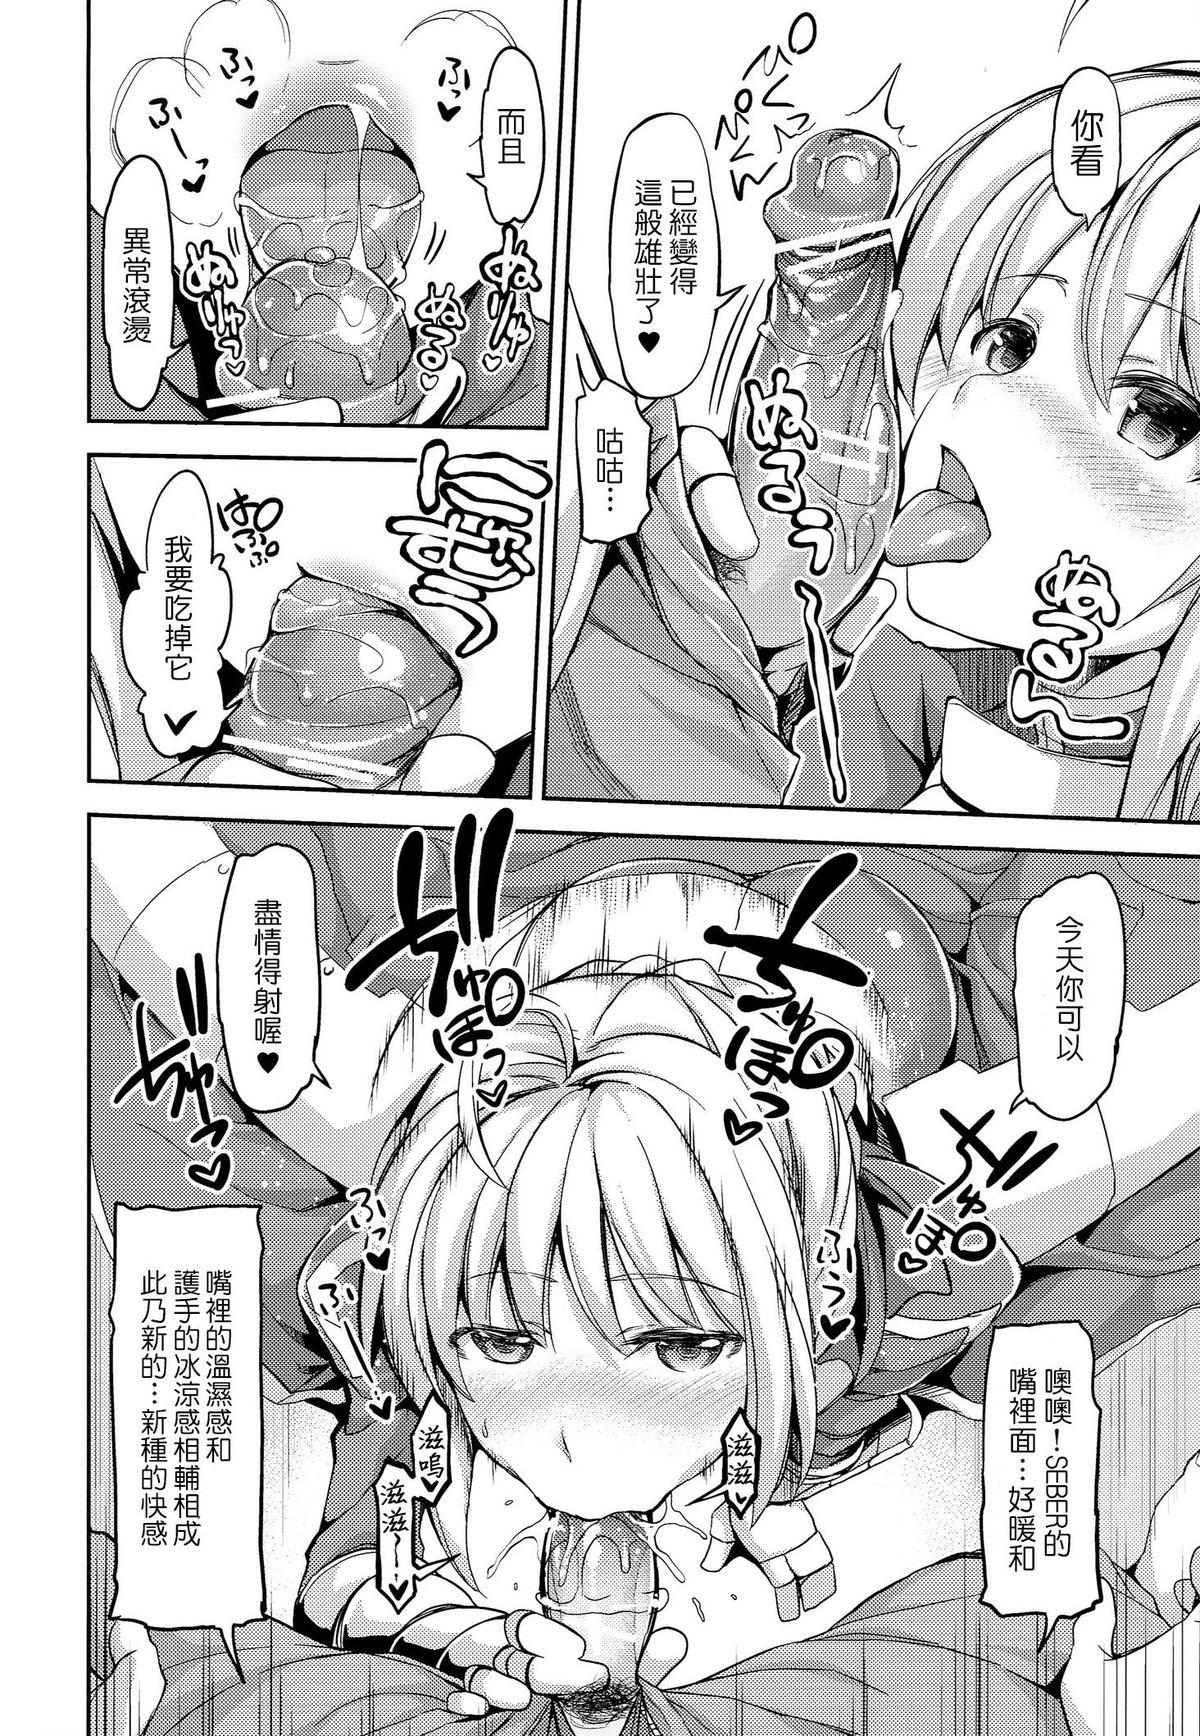 Leite Fate delihell night - Fate stay night Ano - Page 7